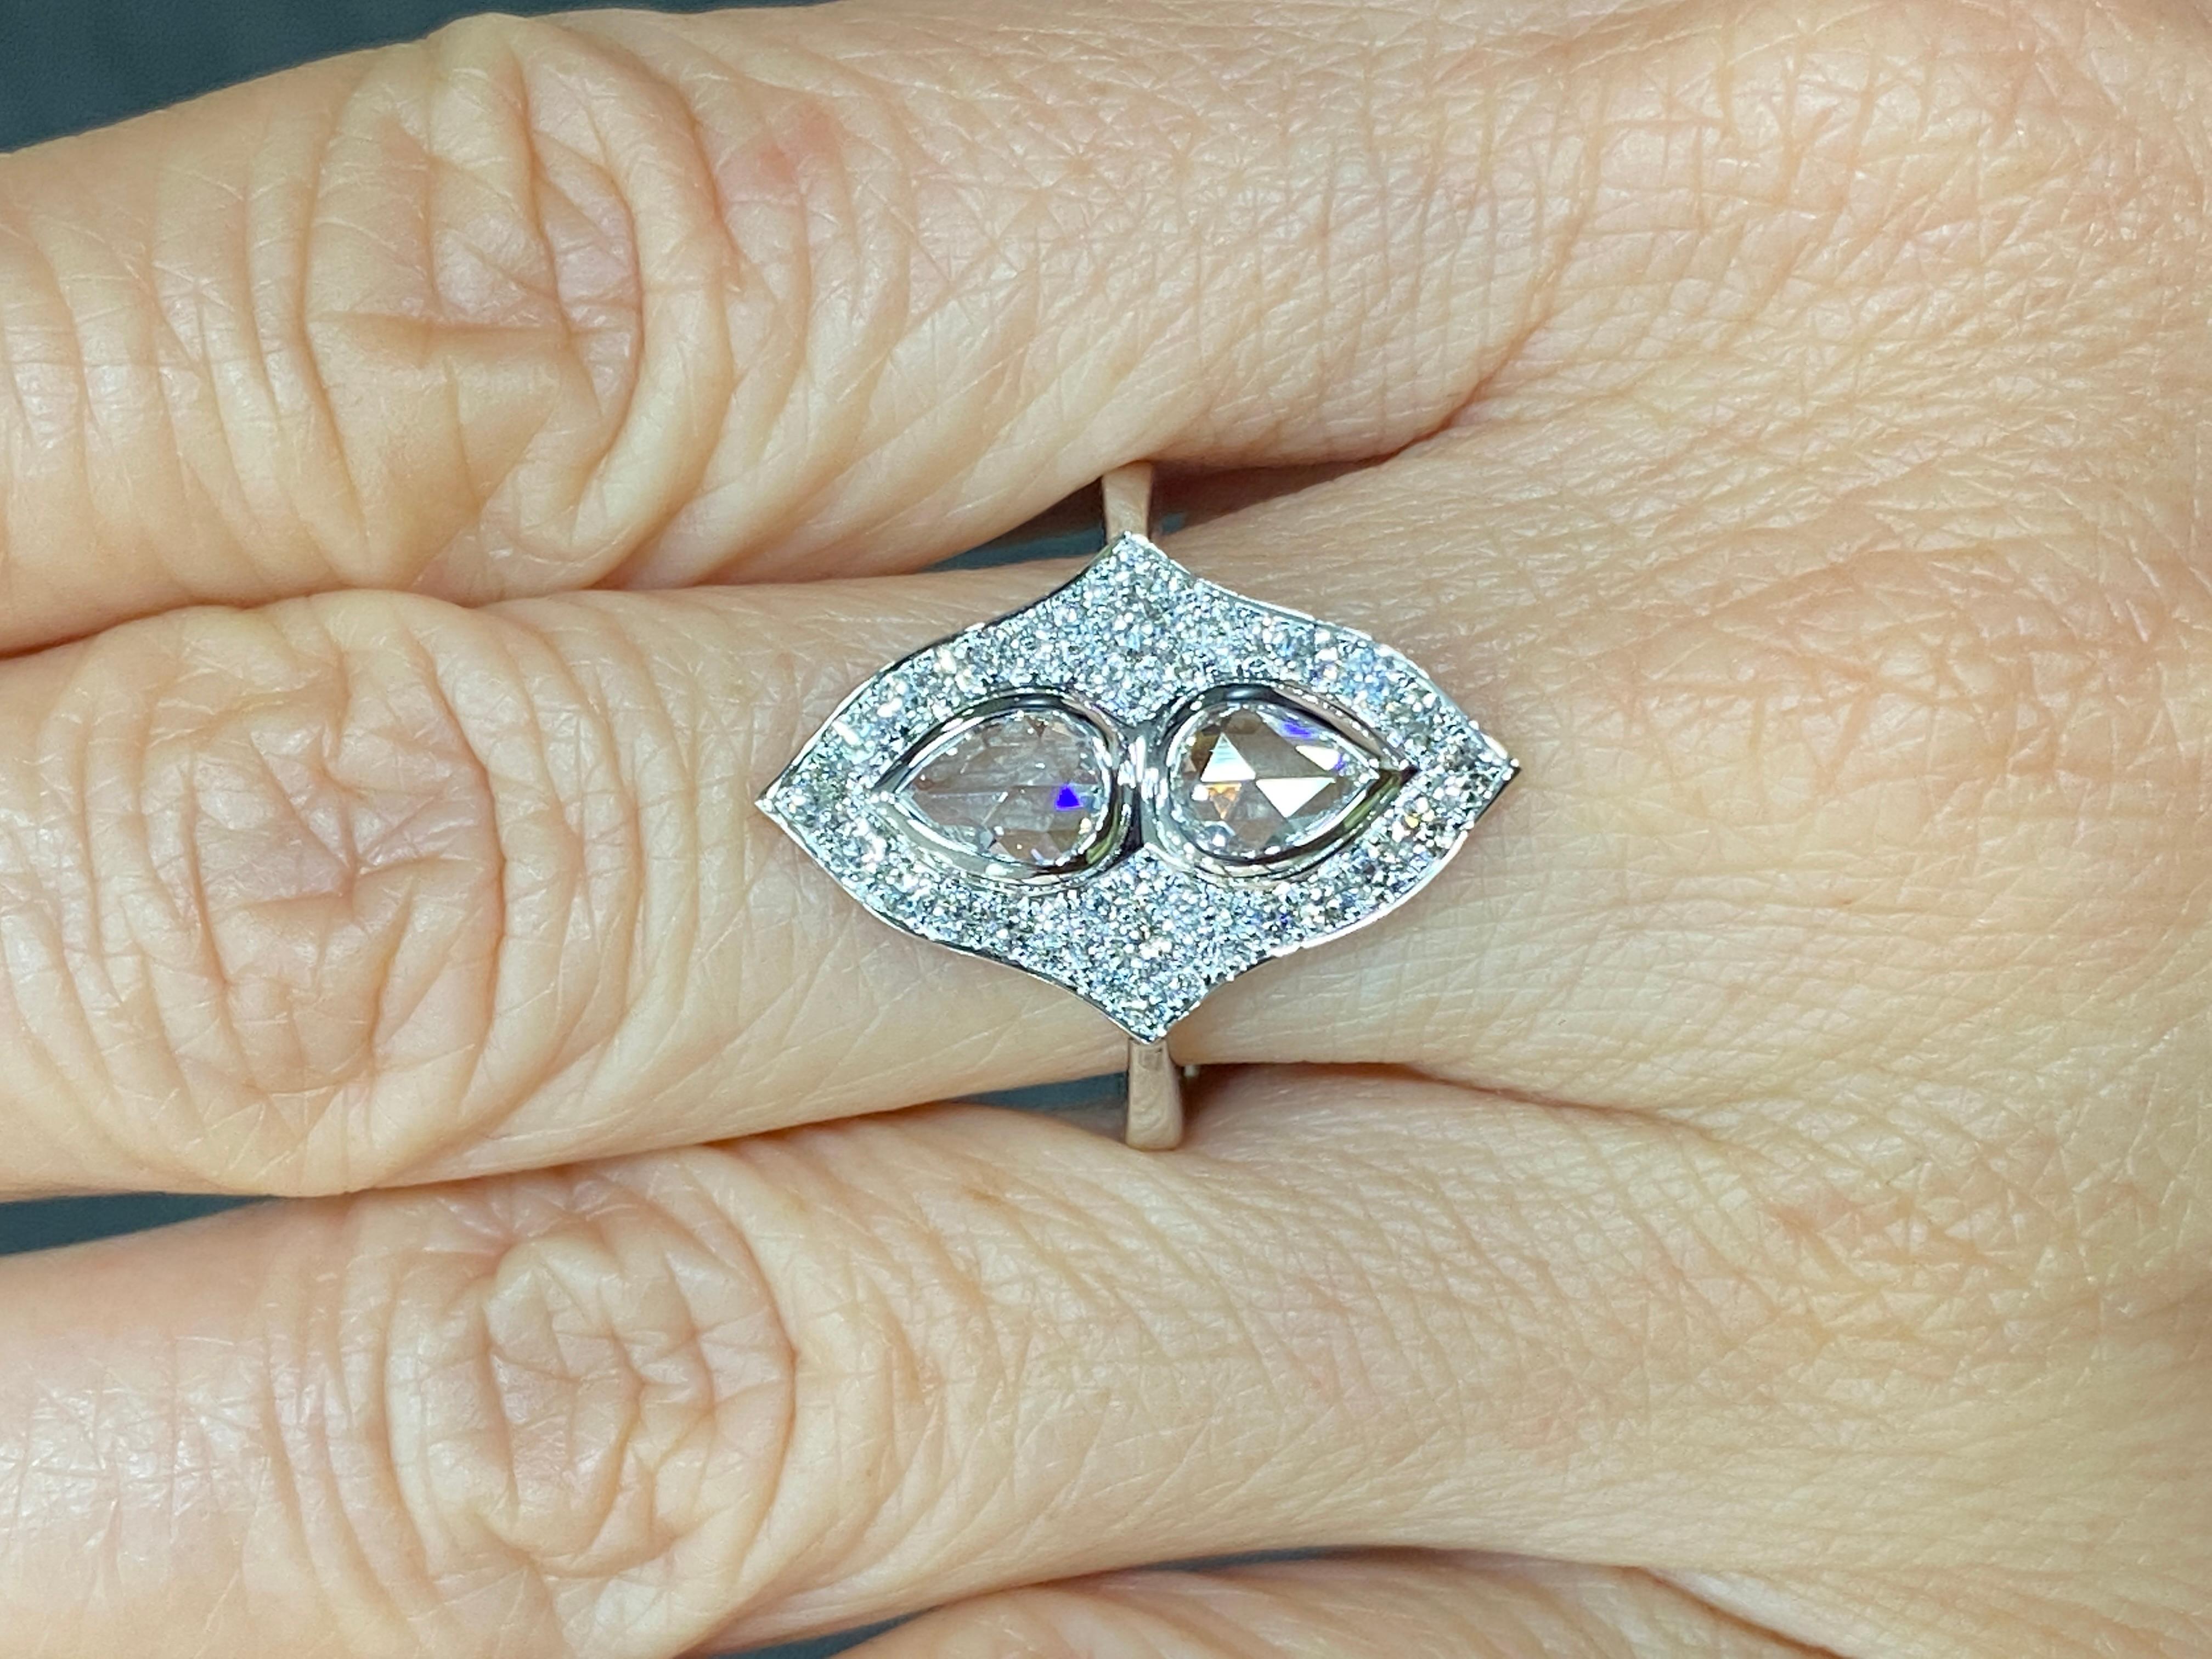 JR Toi et Moi Rose Cut Diamond 18 Karat White Gold Ring

Toi et moi ring with two large rose cut diamond set in 18k white gold

Ring Size Europe 54 (US 6.75) ,
Ring Size can be resize upon request.

Addition details or Video upon request.